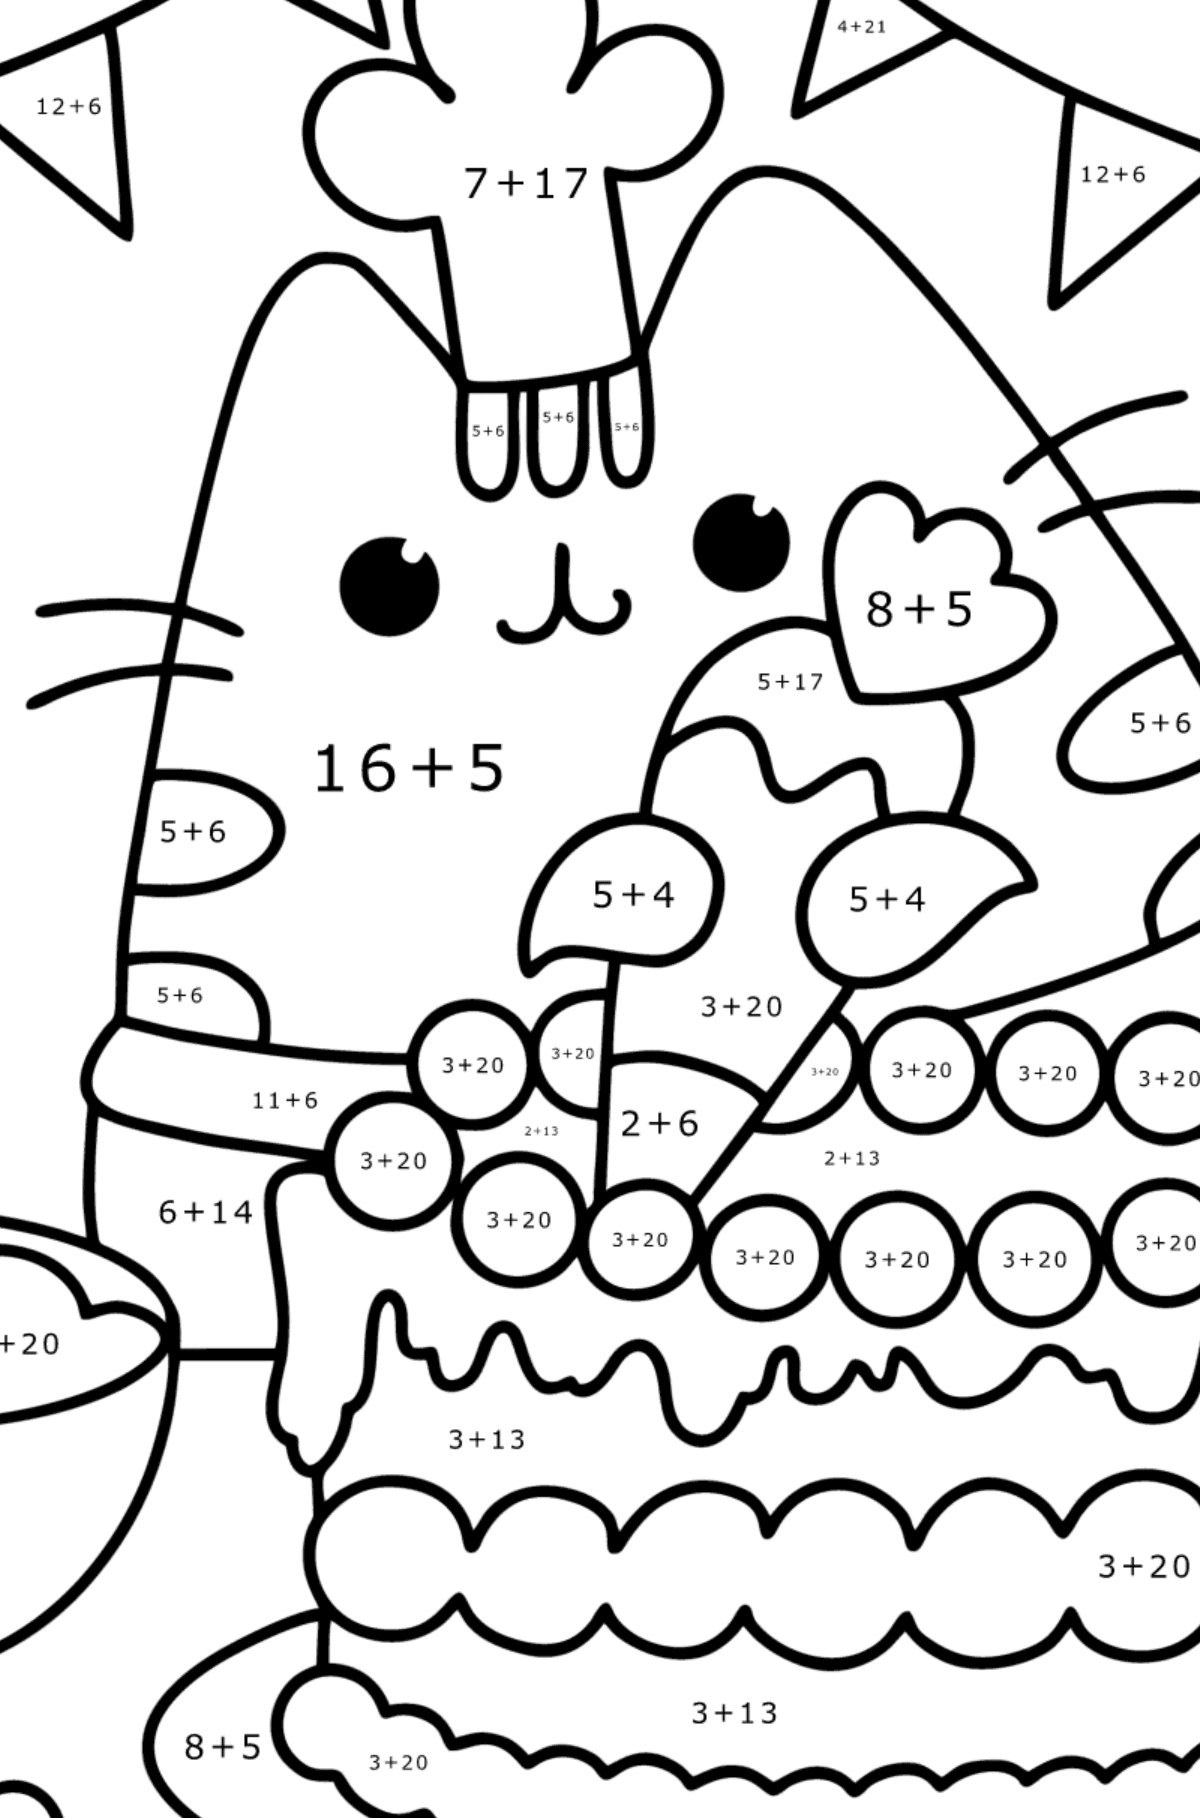 Pusheen birthday сolouring page - Math Coloring - Addition for Kids